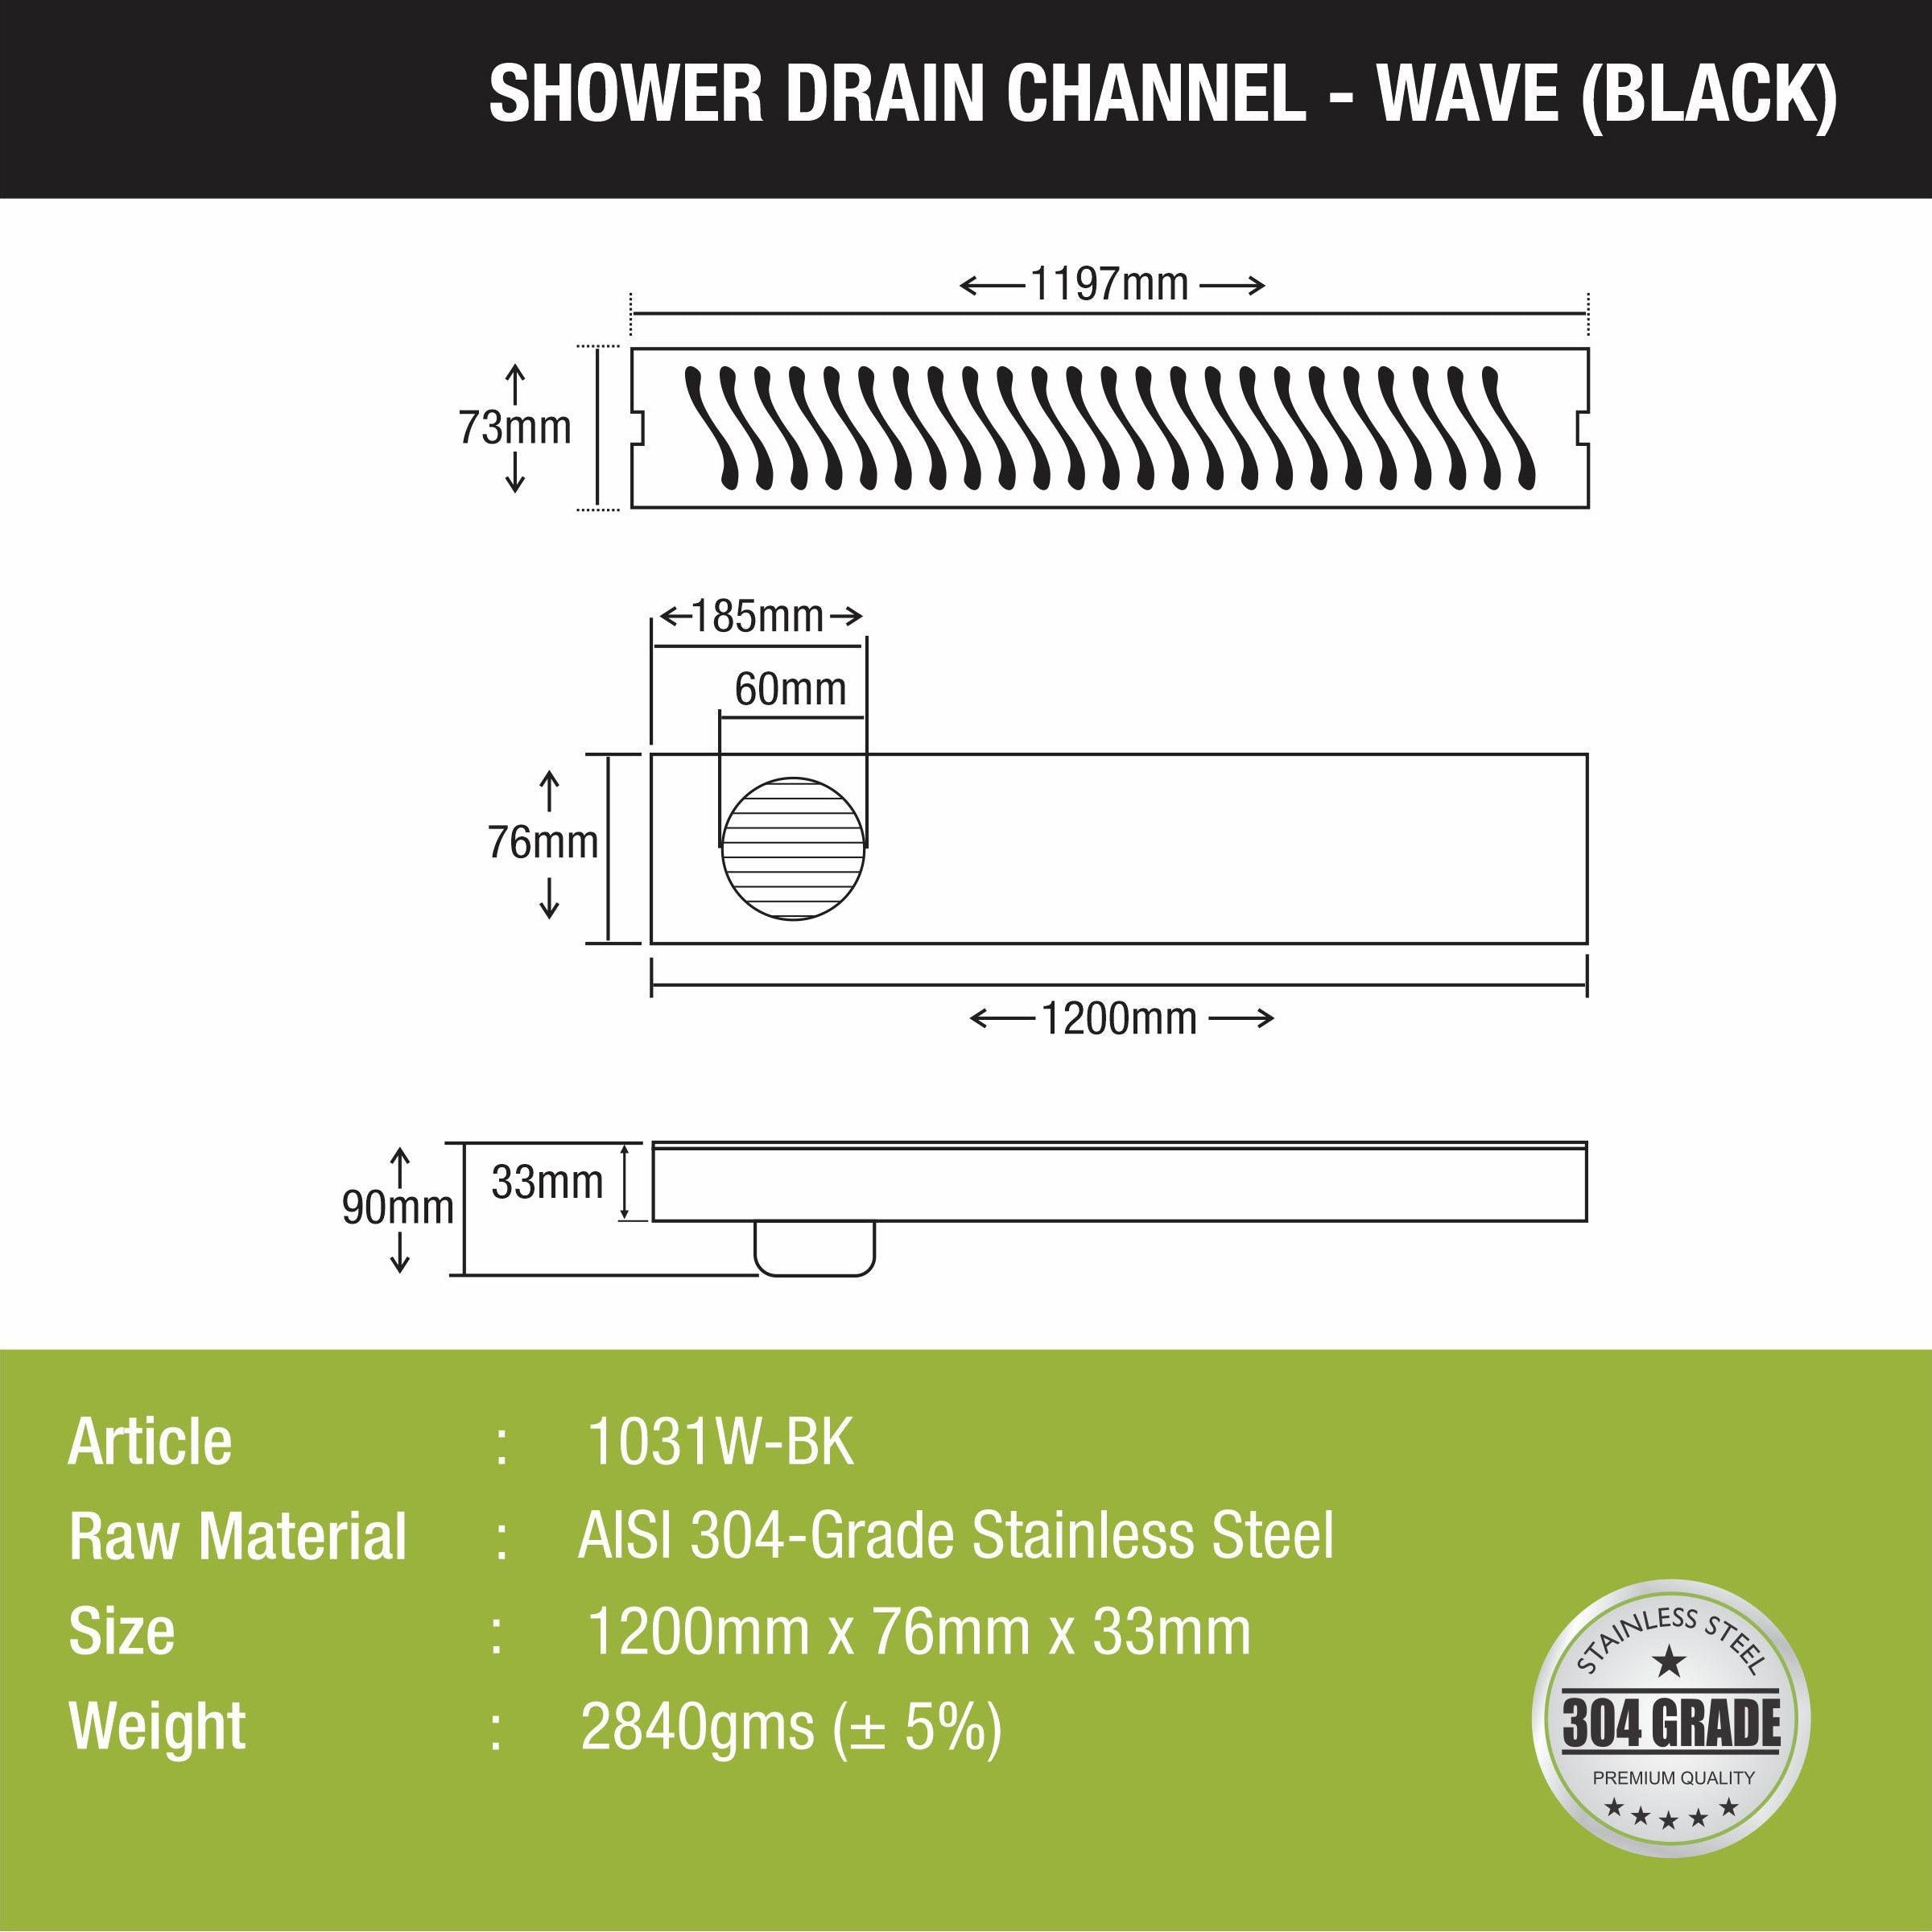 Wave Shower Drain Channel - Black (48 x 3 Inches) size and measurement